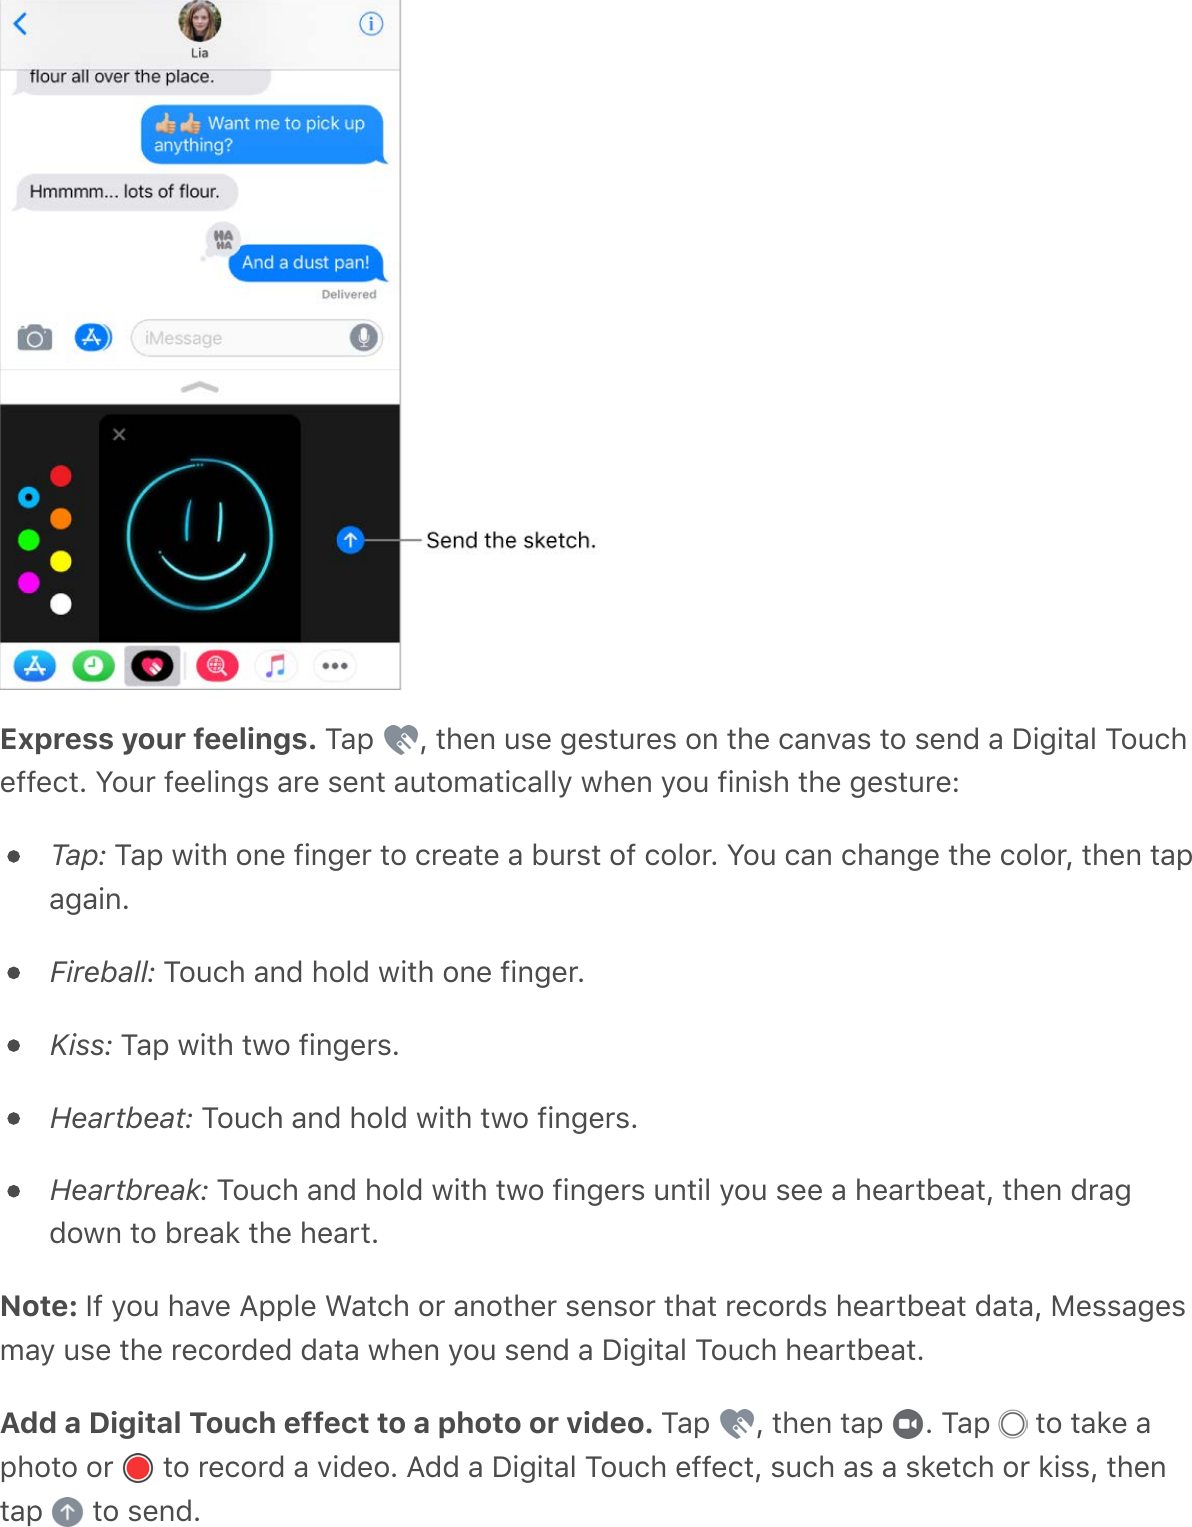 Express your feelings. Tap  , then use gestures on the canvas to send a Digital Toucheffect. Your feelings are sent automatically when you finish the gesture:Tap: Tap with one finger to create a burst of color. You can change the color, then tapagain.Fireball: Touch and hold with one finger.Kiss: Tap with two fingers.Heartbeat: Touch and hold with two fingers.Heartbreak: Touch and hold with two fingers until you see a heartbeat, then dragdown to break the heart.Note: If you have Apple Watch or another sensor that records heartbeat data, Messagesmay use the recorded data when you send a Digital Touch heartbeat.Add a Digital Touch effect to a photo or video. Tap  , then tap  . Tap   to take aphoto or   to record a video. Add a Digital Touch effect, such as a sketch or kiss, thentap   to send.